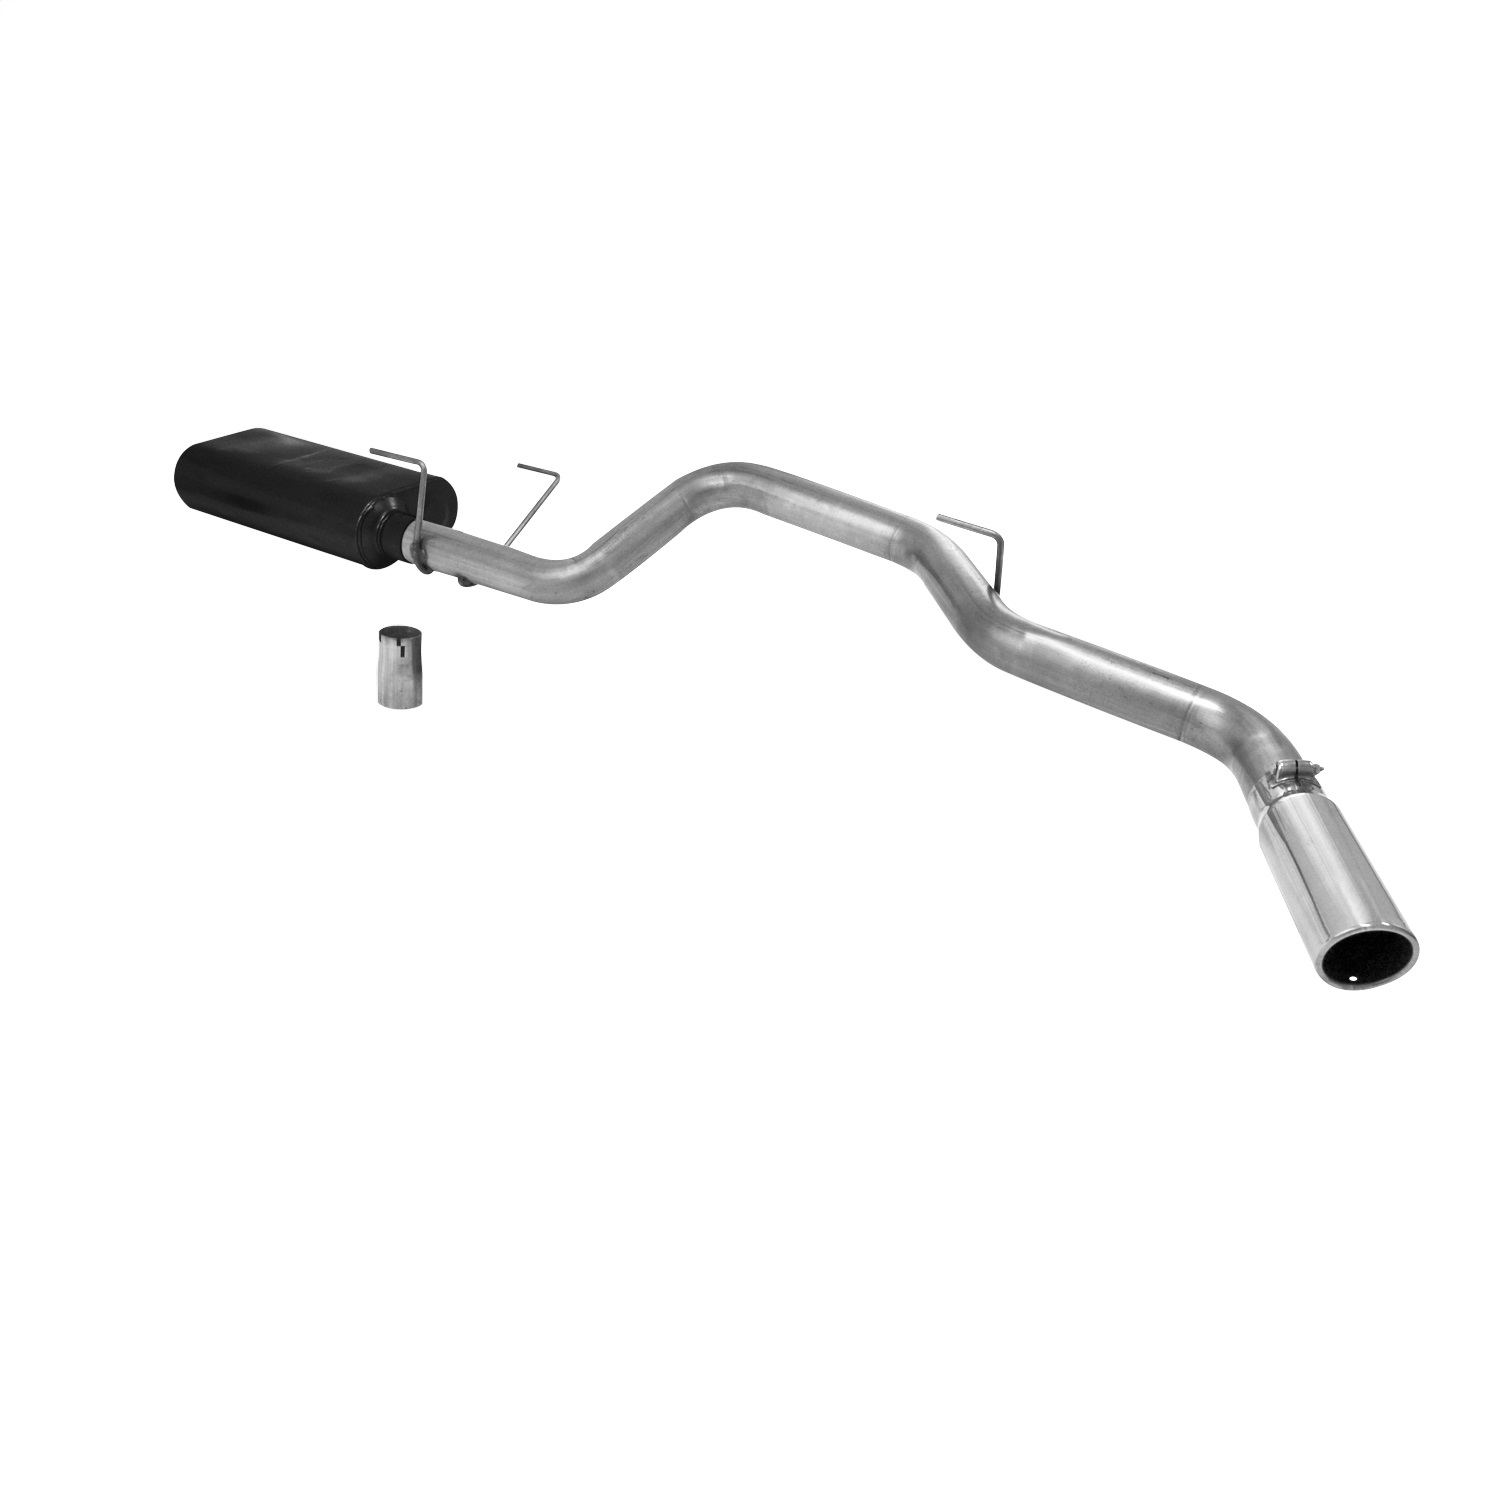 Flowmaster Flowmaster 817513 American Thunder Cat Back Exhaust System Fits 04-05 Ram 1500